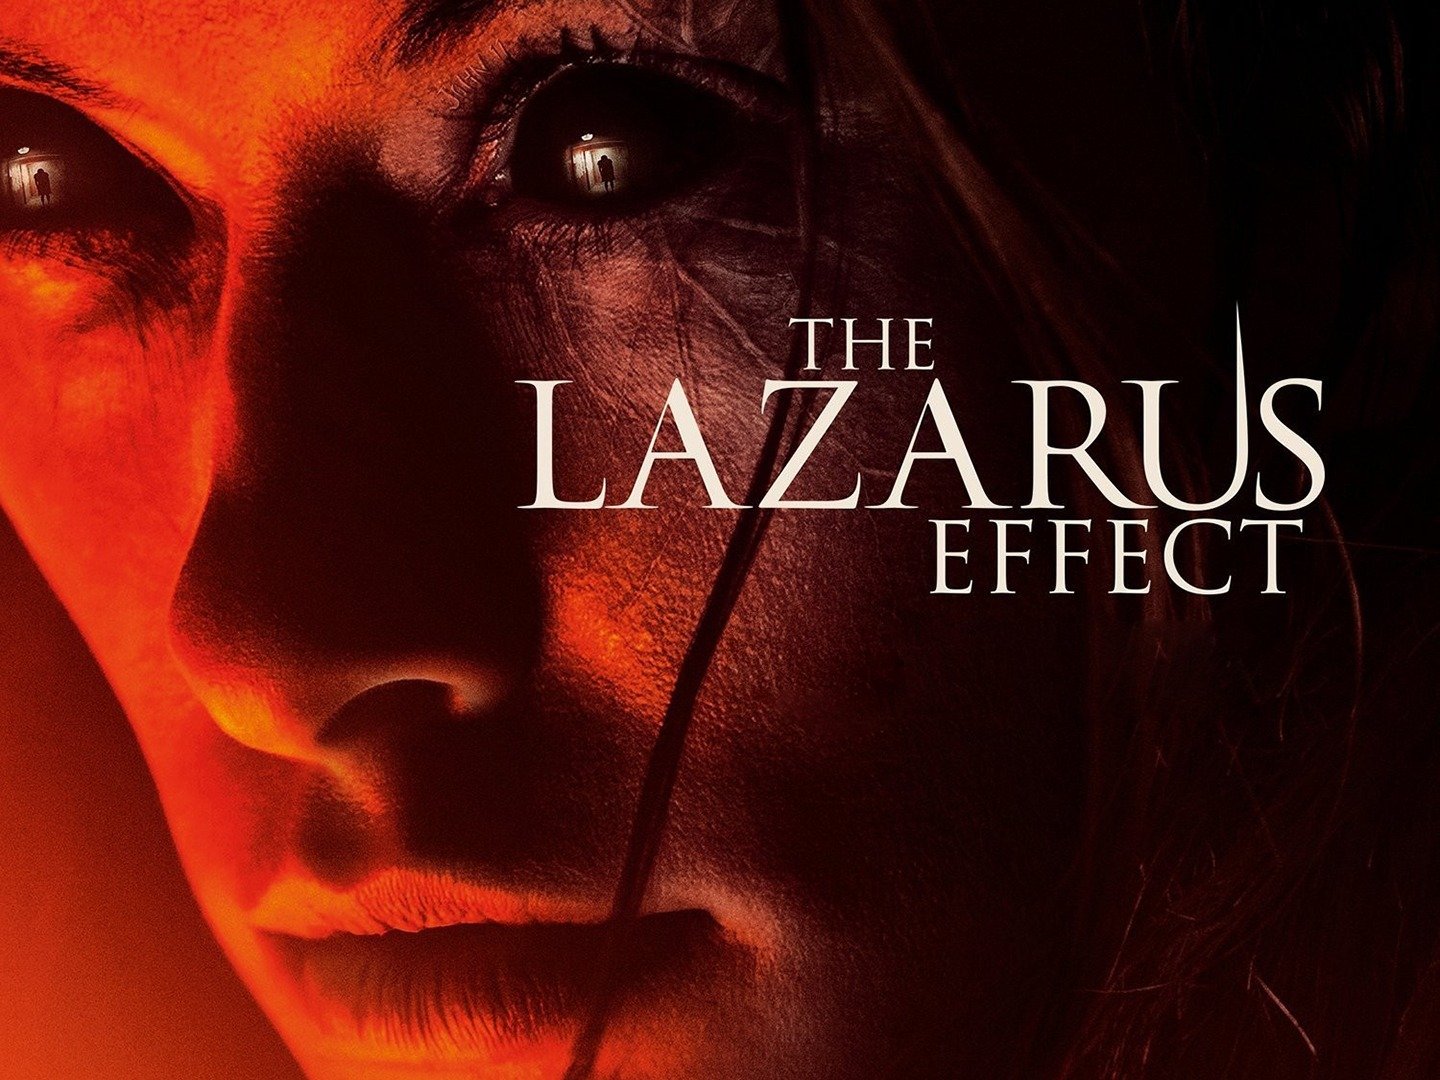 The Lazarus Effect Trailer 1 Trailers Videos Rotten Tomatoes